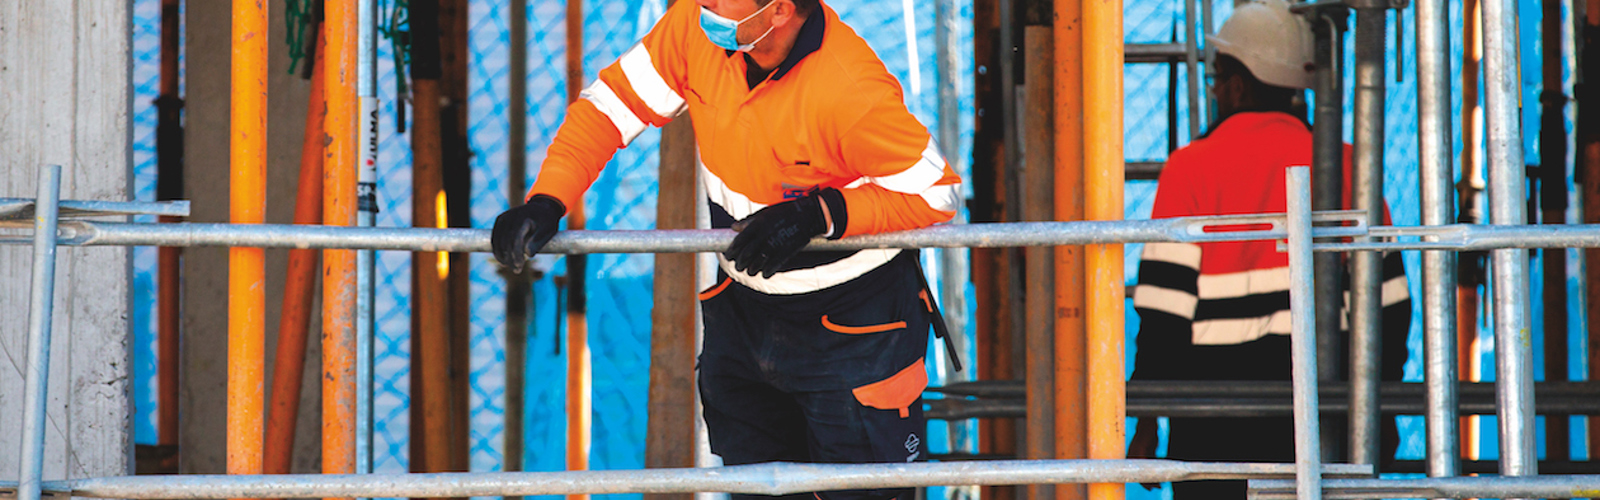 A person in a hard hat and facemask on a building site